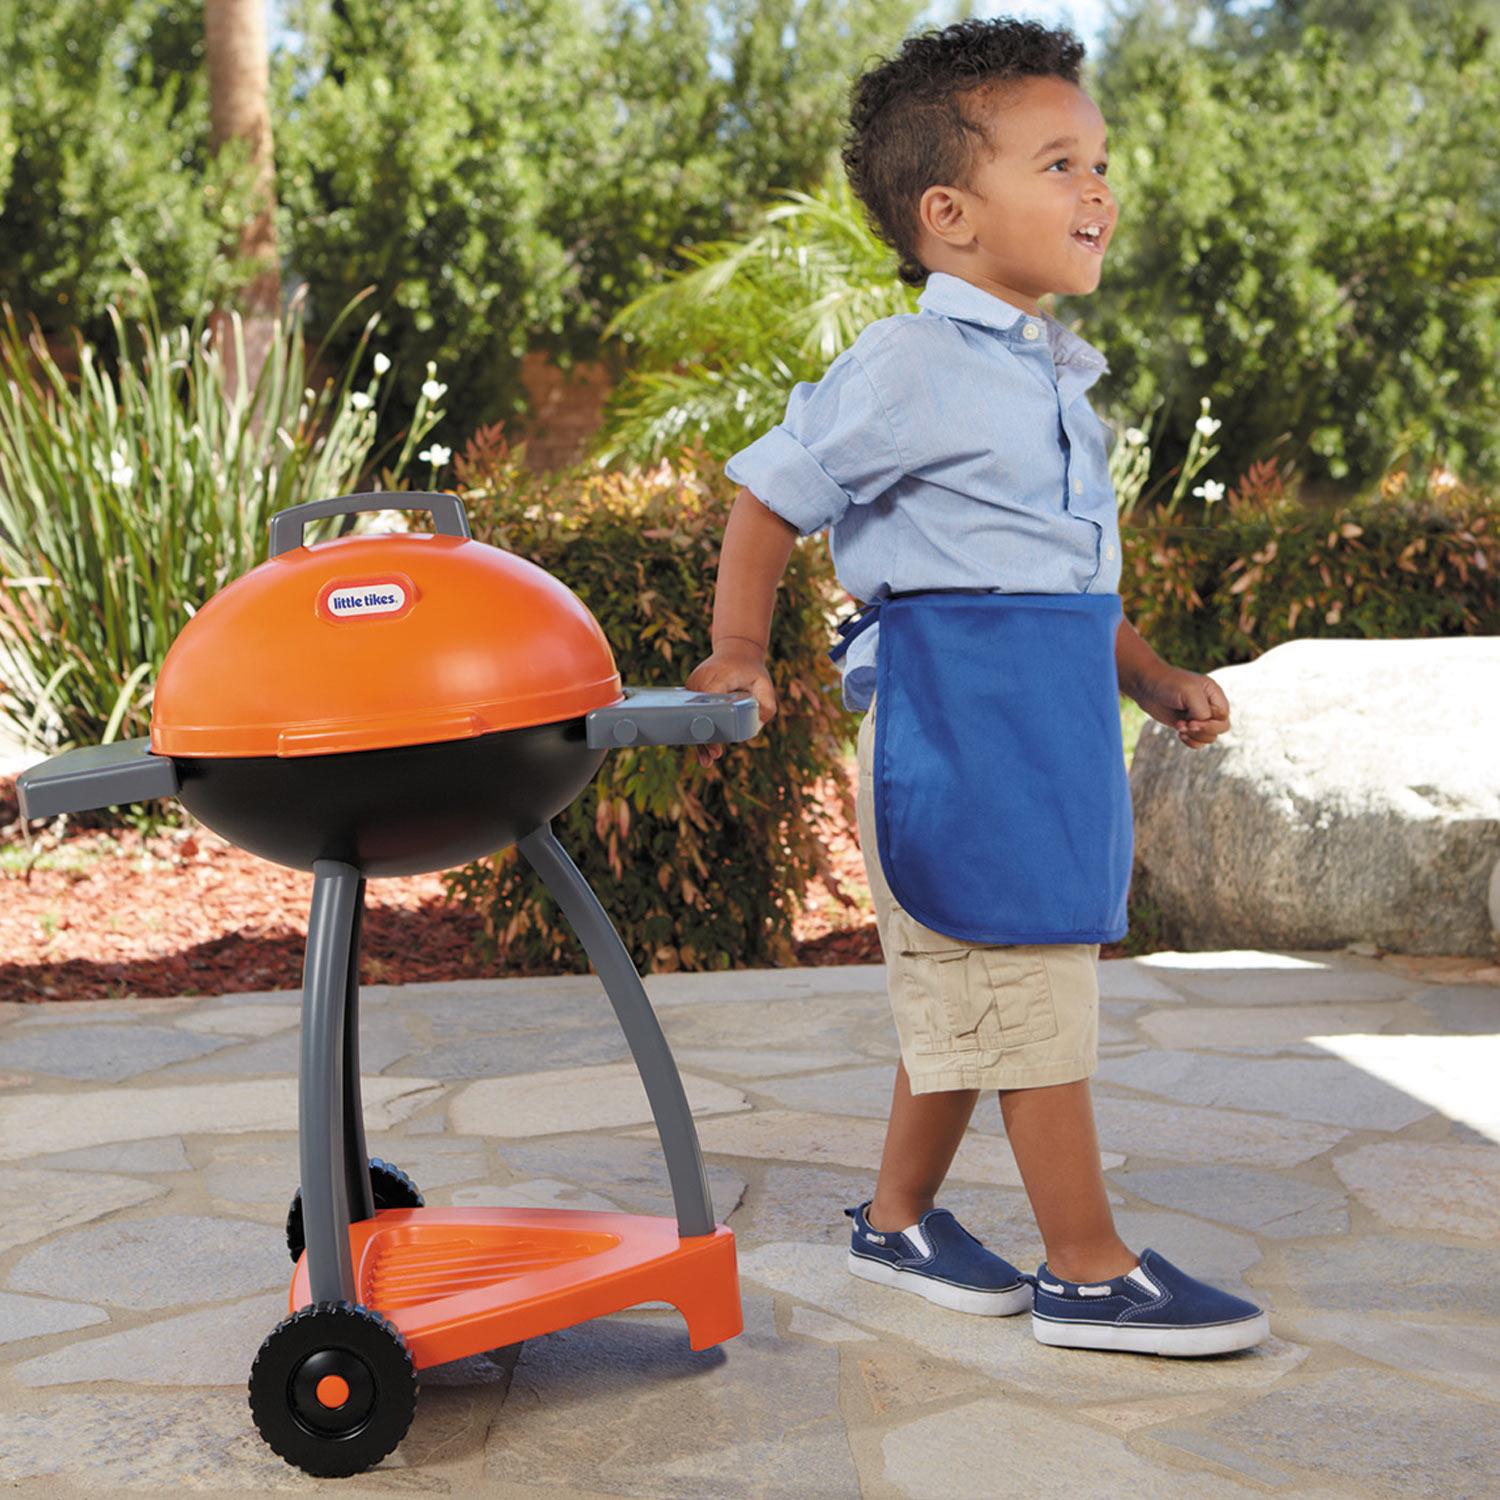 Miniature electric BBQ Grill Toy – Innovation